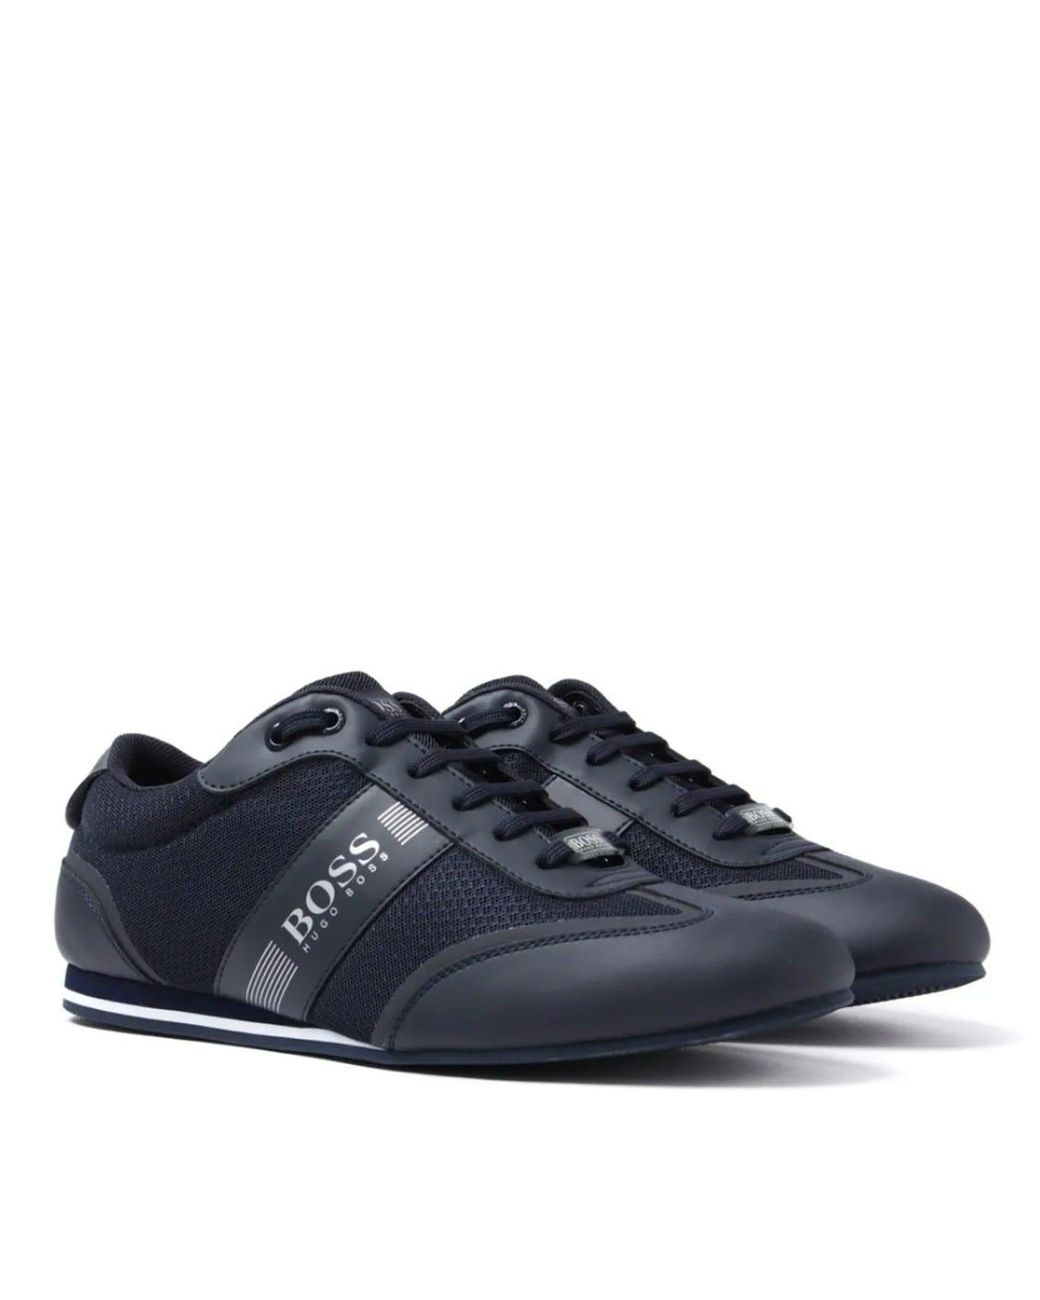 Hugo Boss Lighter Low Mxme 50370438 410 Mens Trainers Navy Sneakers Shoes 